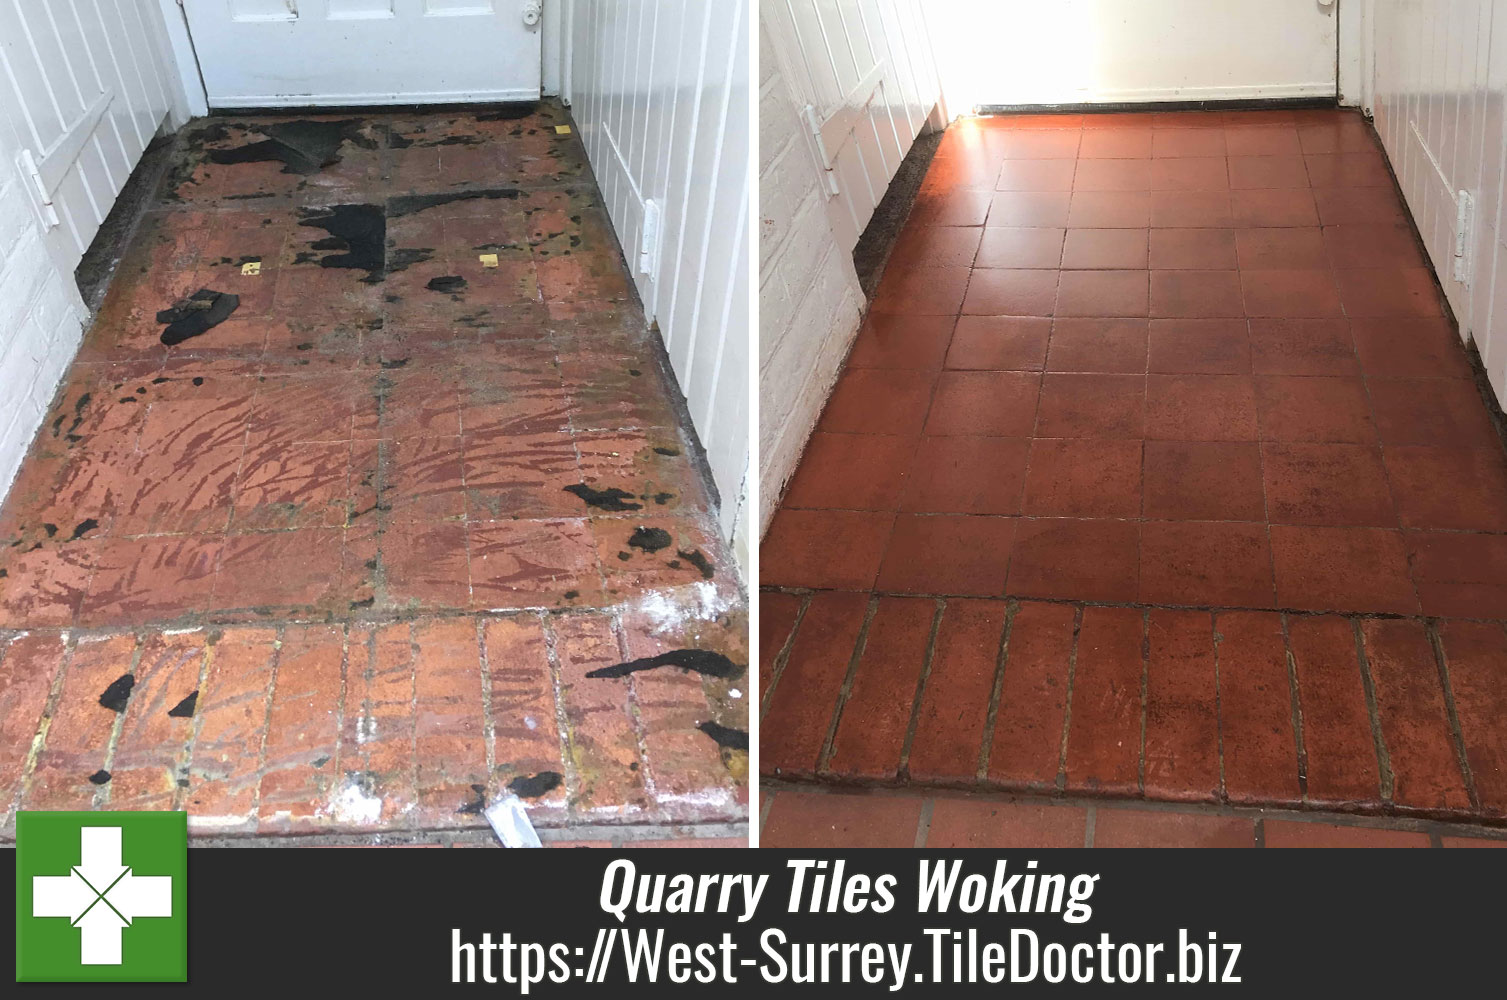 Using Coarse Diamond Pads to Remove Glue and Paint from Quarry Tiles in Woking